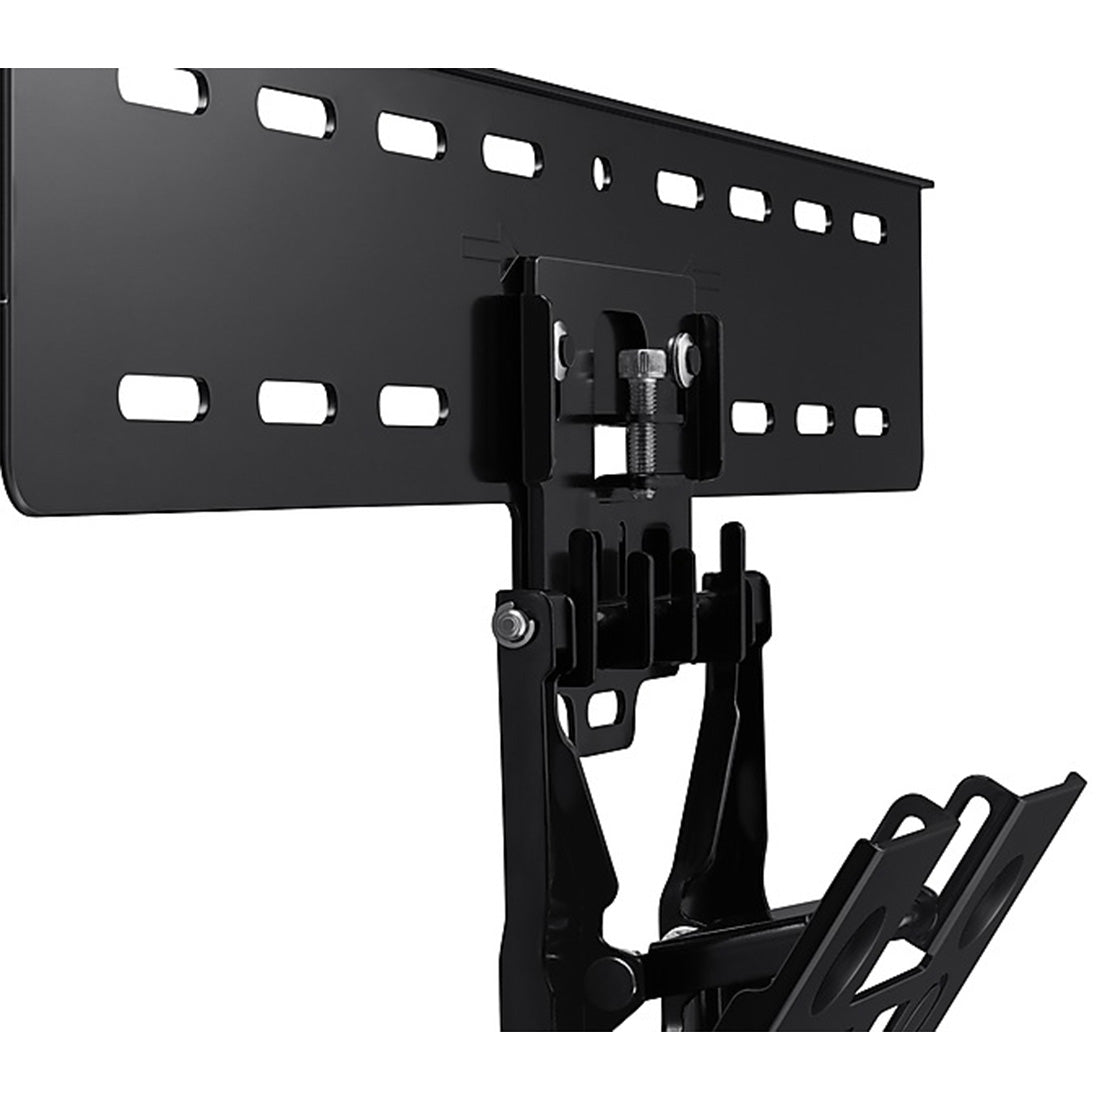 Samsung WMN-R30EB/ZA No Gap Wall-Mount for QLED over 82” – BB